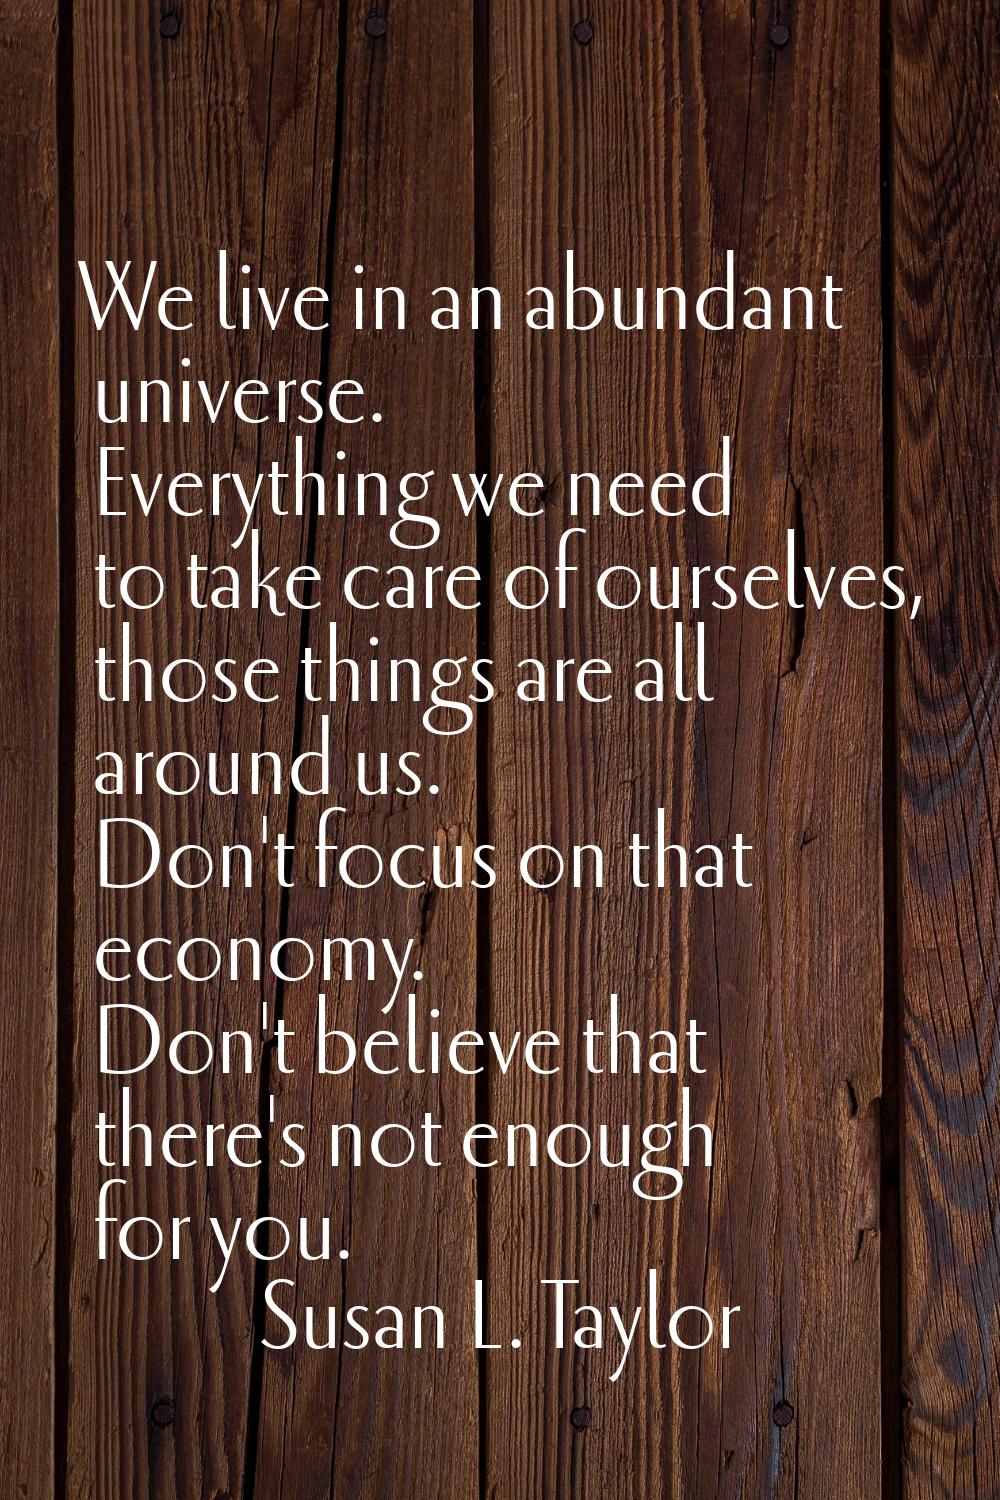 We live in an abundant universe. Everything we need to take care of ourselves, those things are all